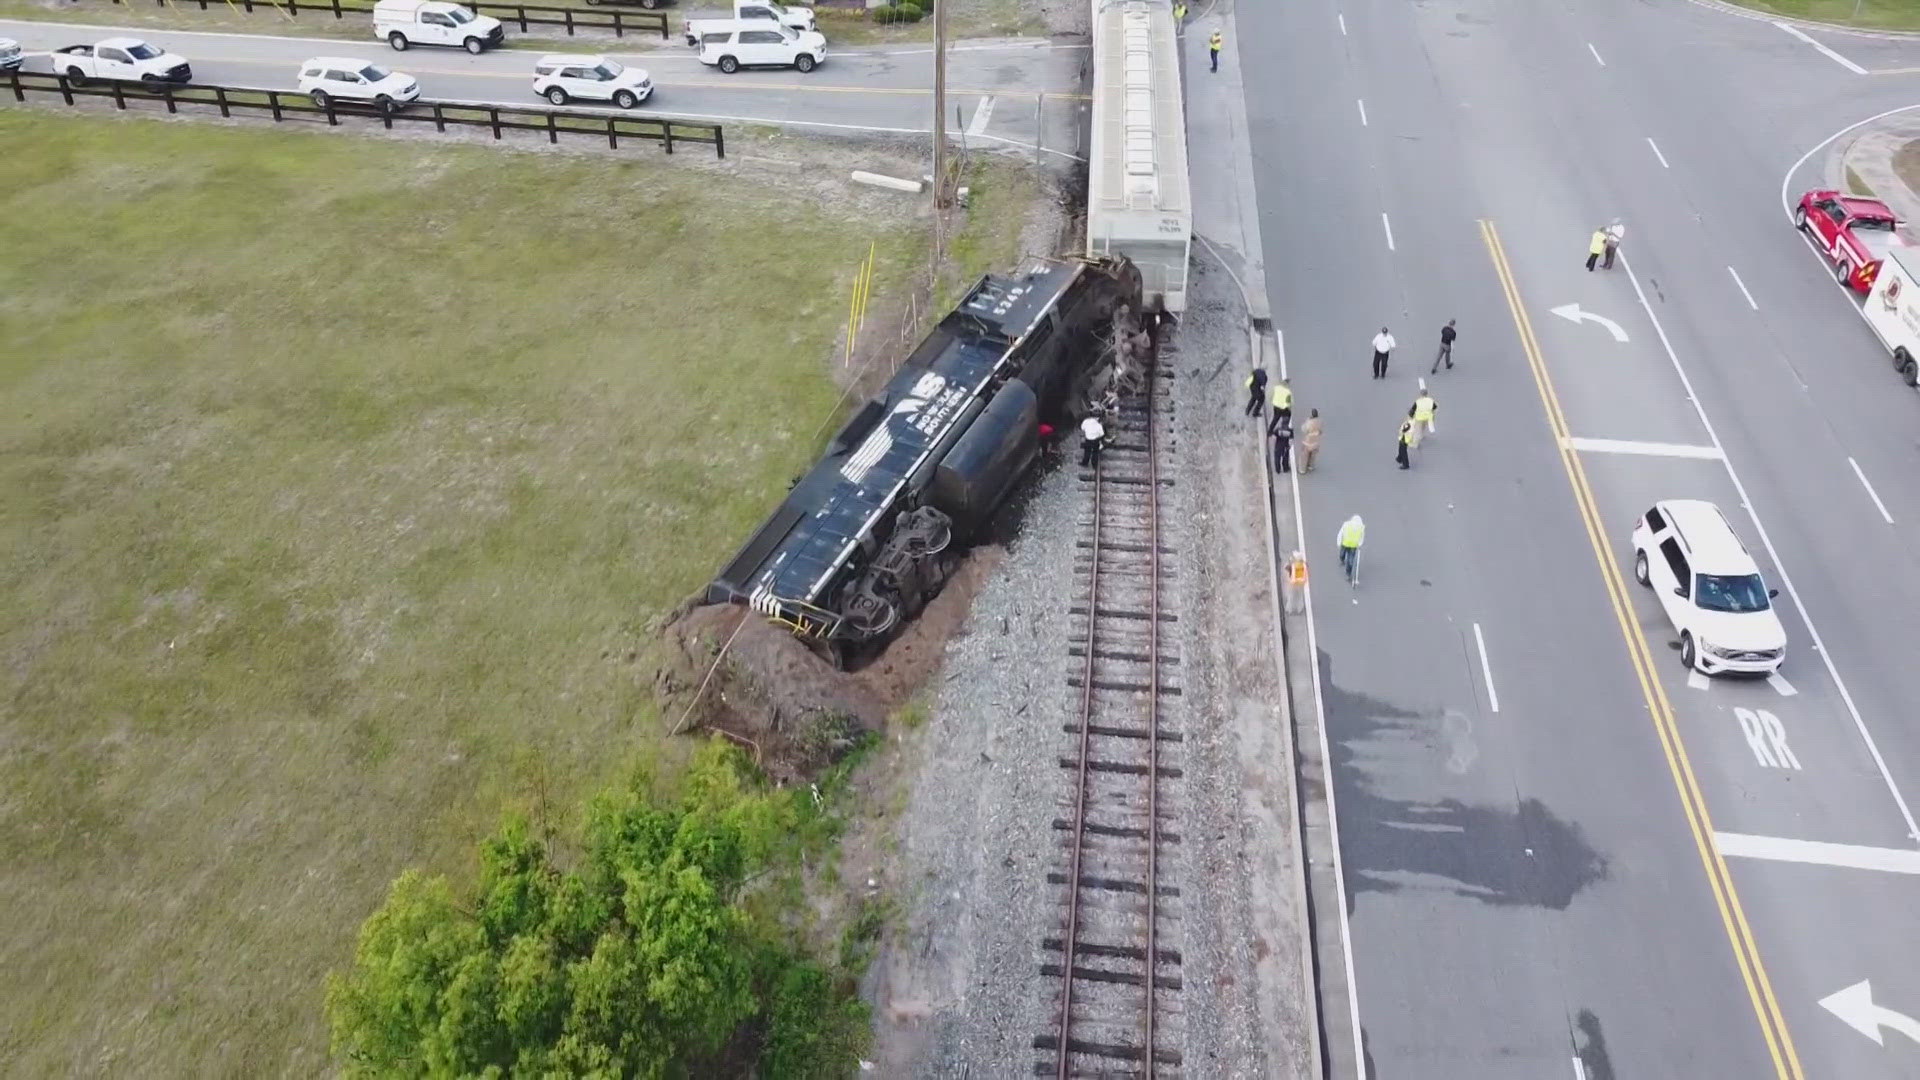 Emergency officials said Friday afternoon that no one was injured following this train derailment in Brunswick.